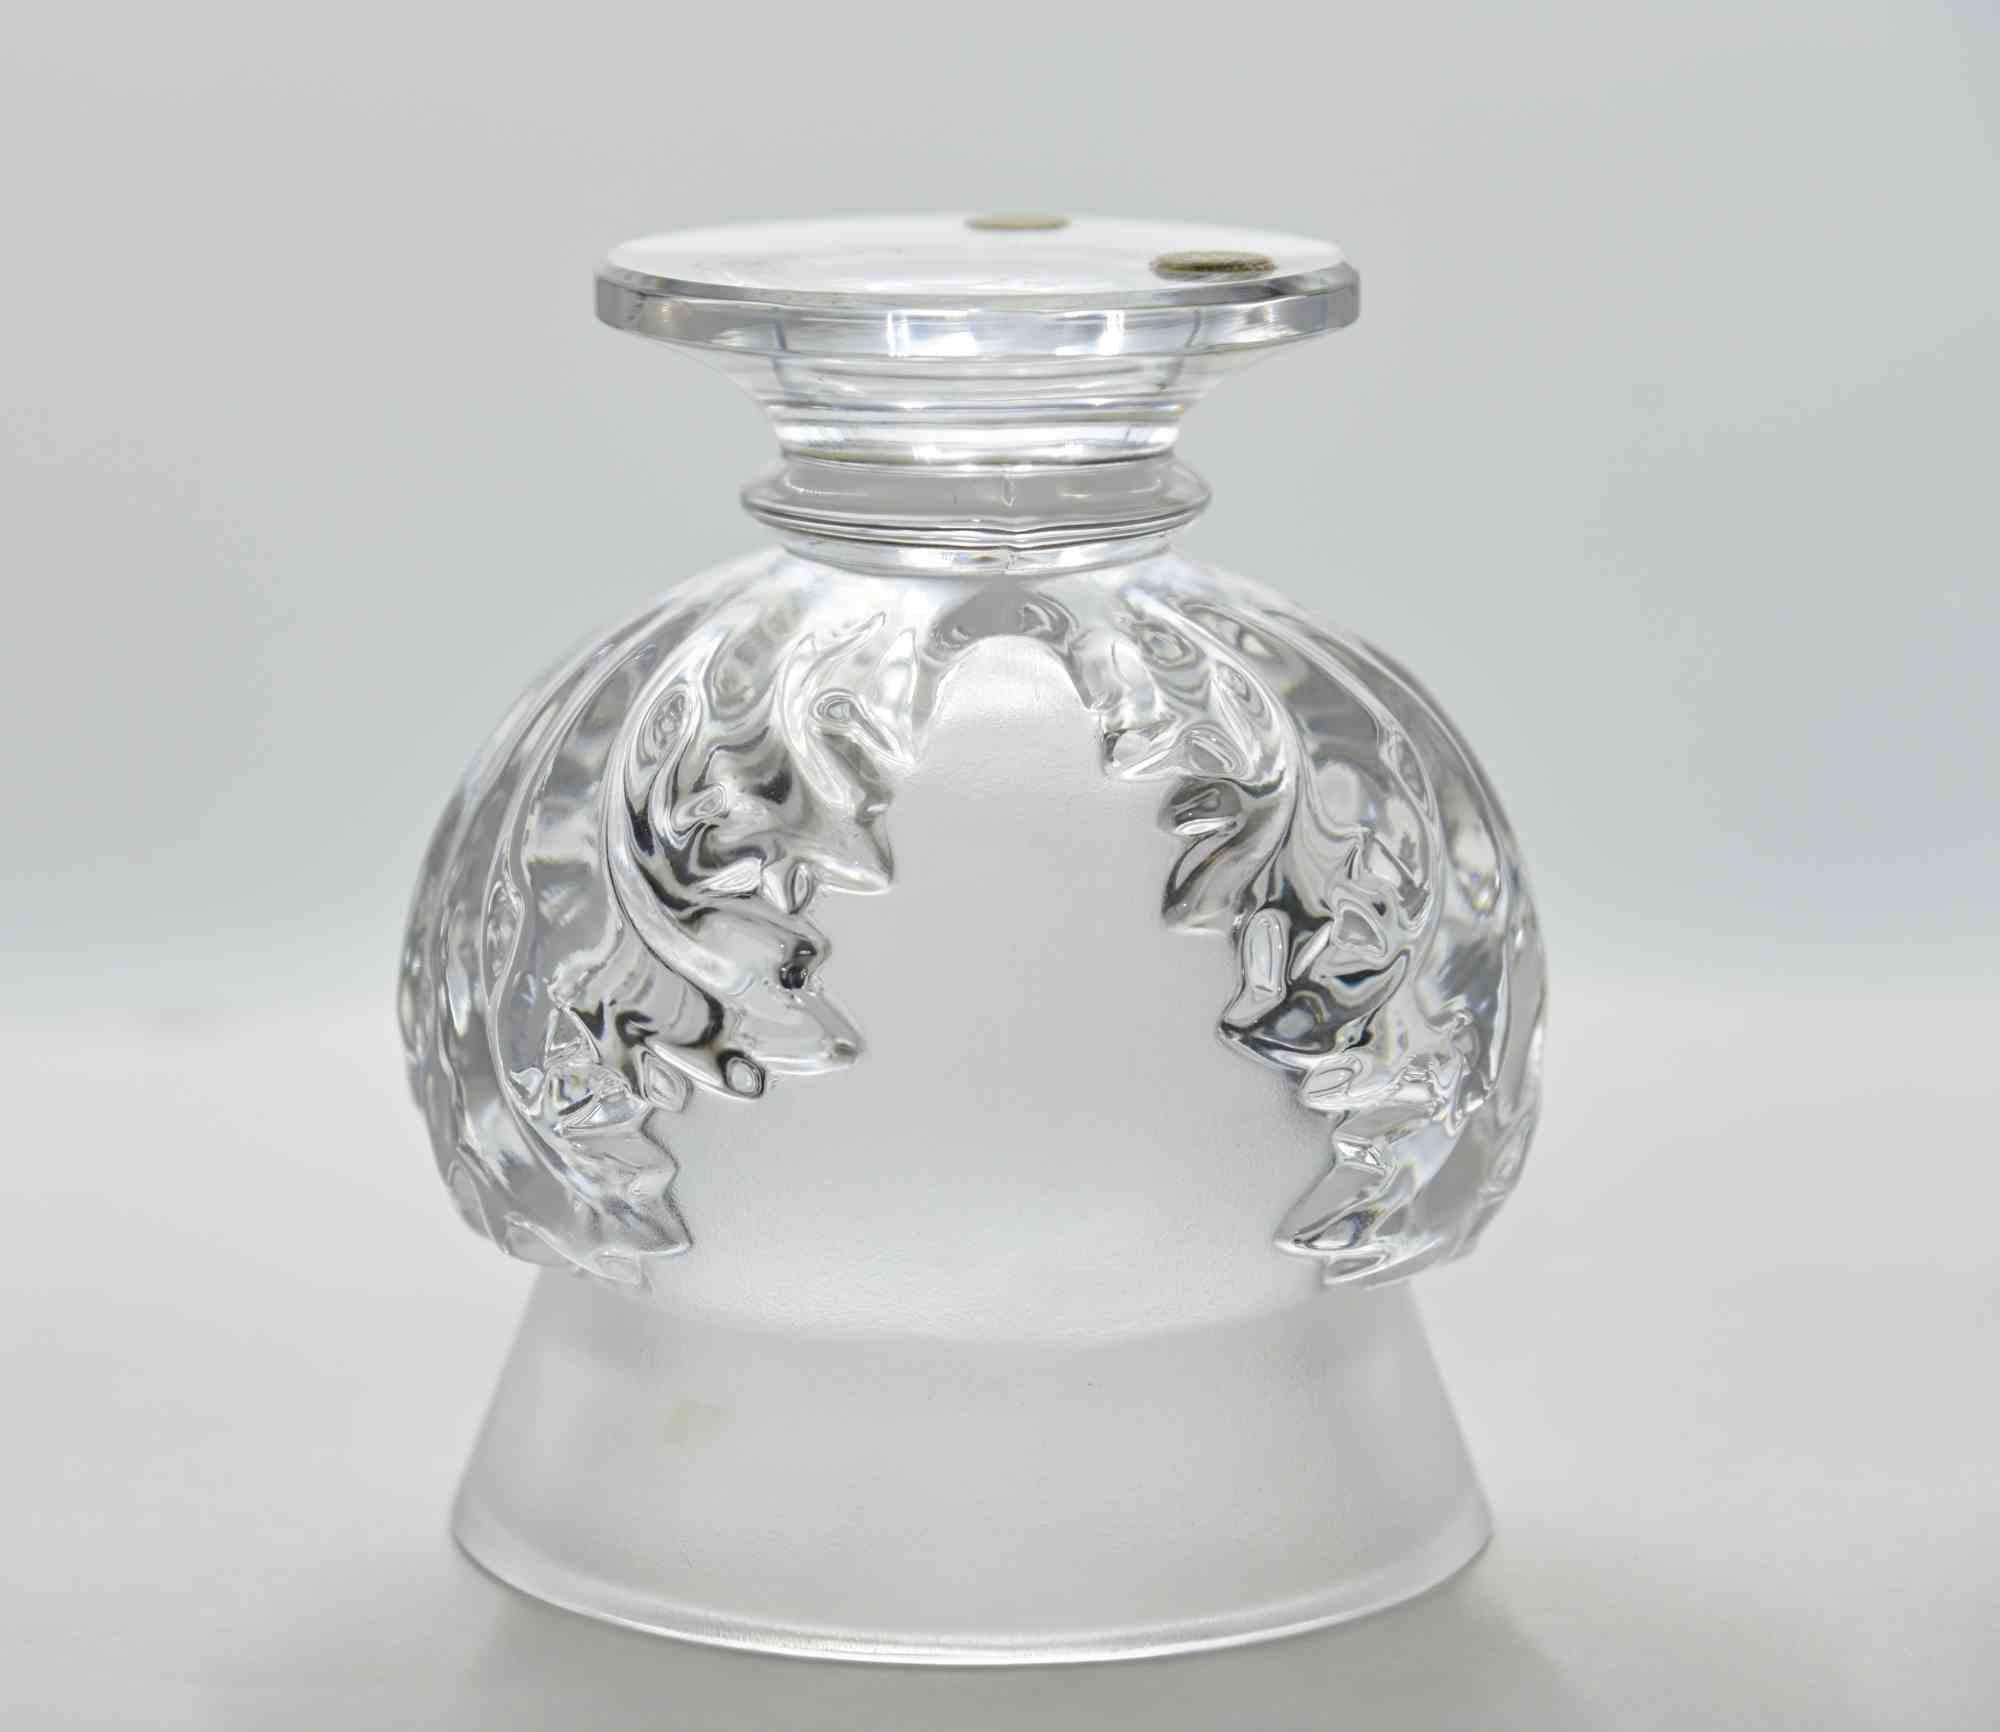 Vintage Glass Vase by Lalique, France mid-20th century.

cm H11.5xD9.5.

Signature printed in acic on bottom.

Very good condition.